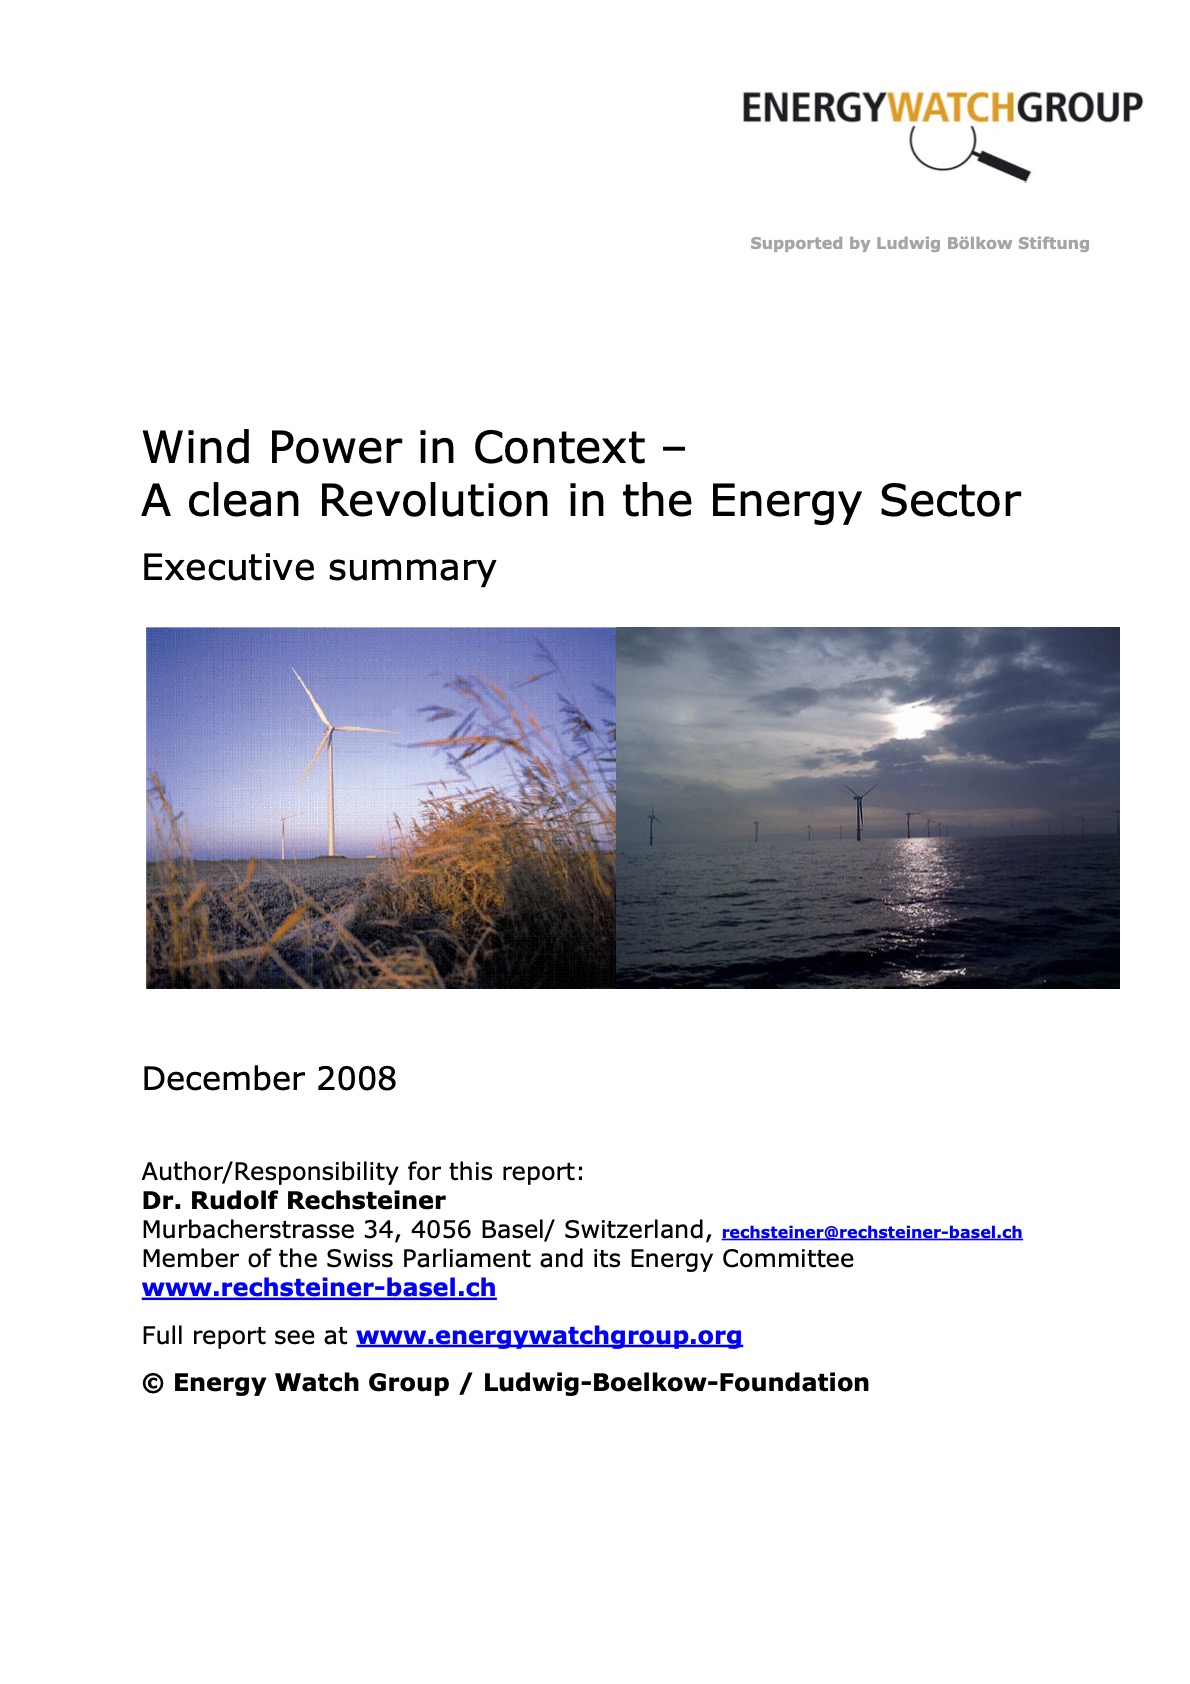 01b_Wind_Power_in_Context_exec_summary_2008-12-18